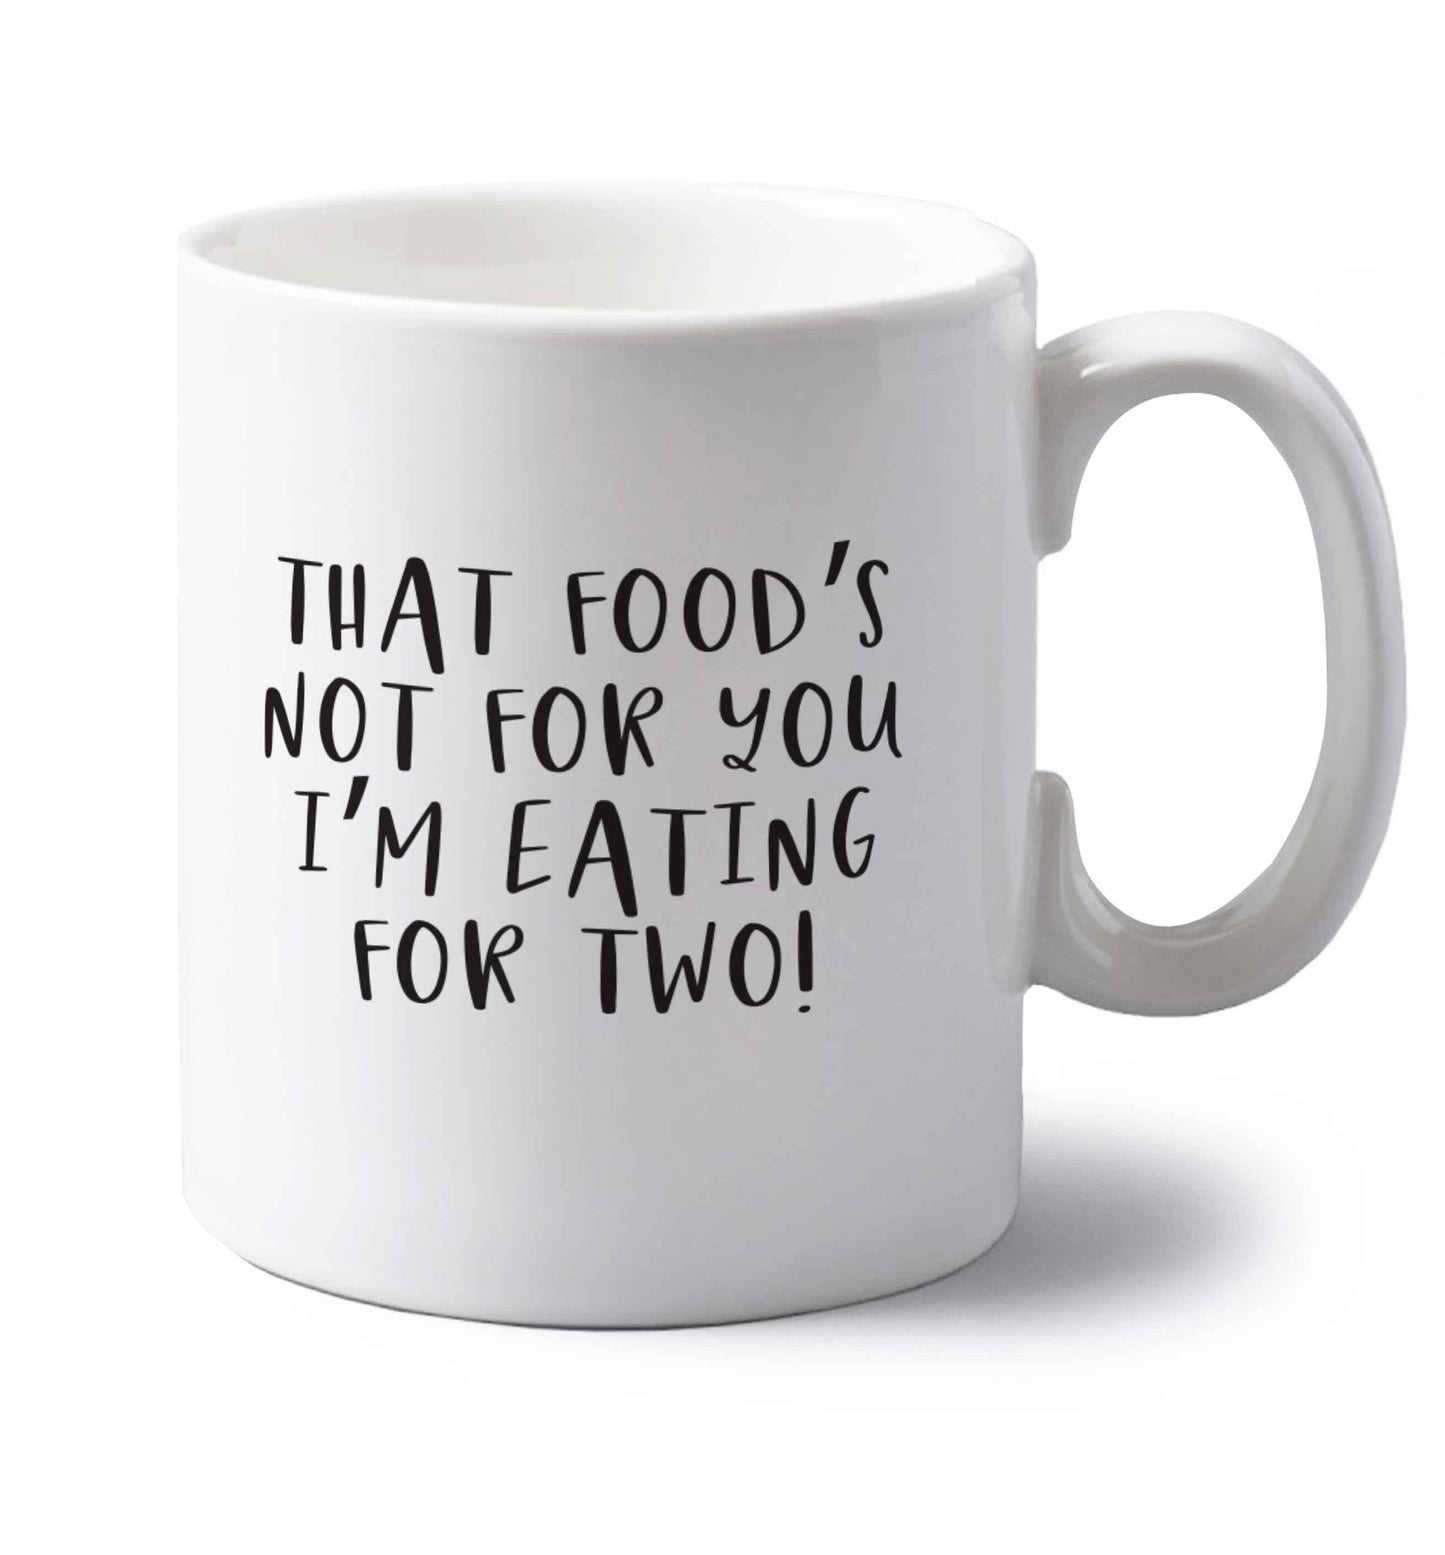 That food's not for you I'm eating for two left handed white ceramic mug 